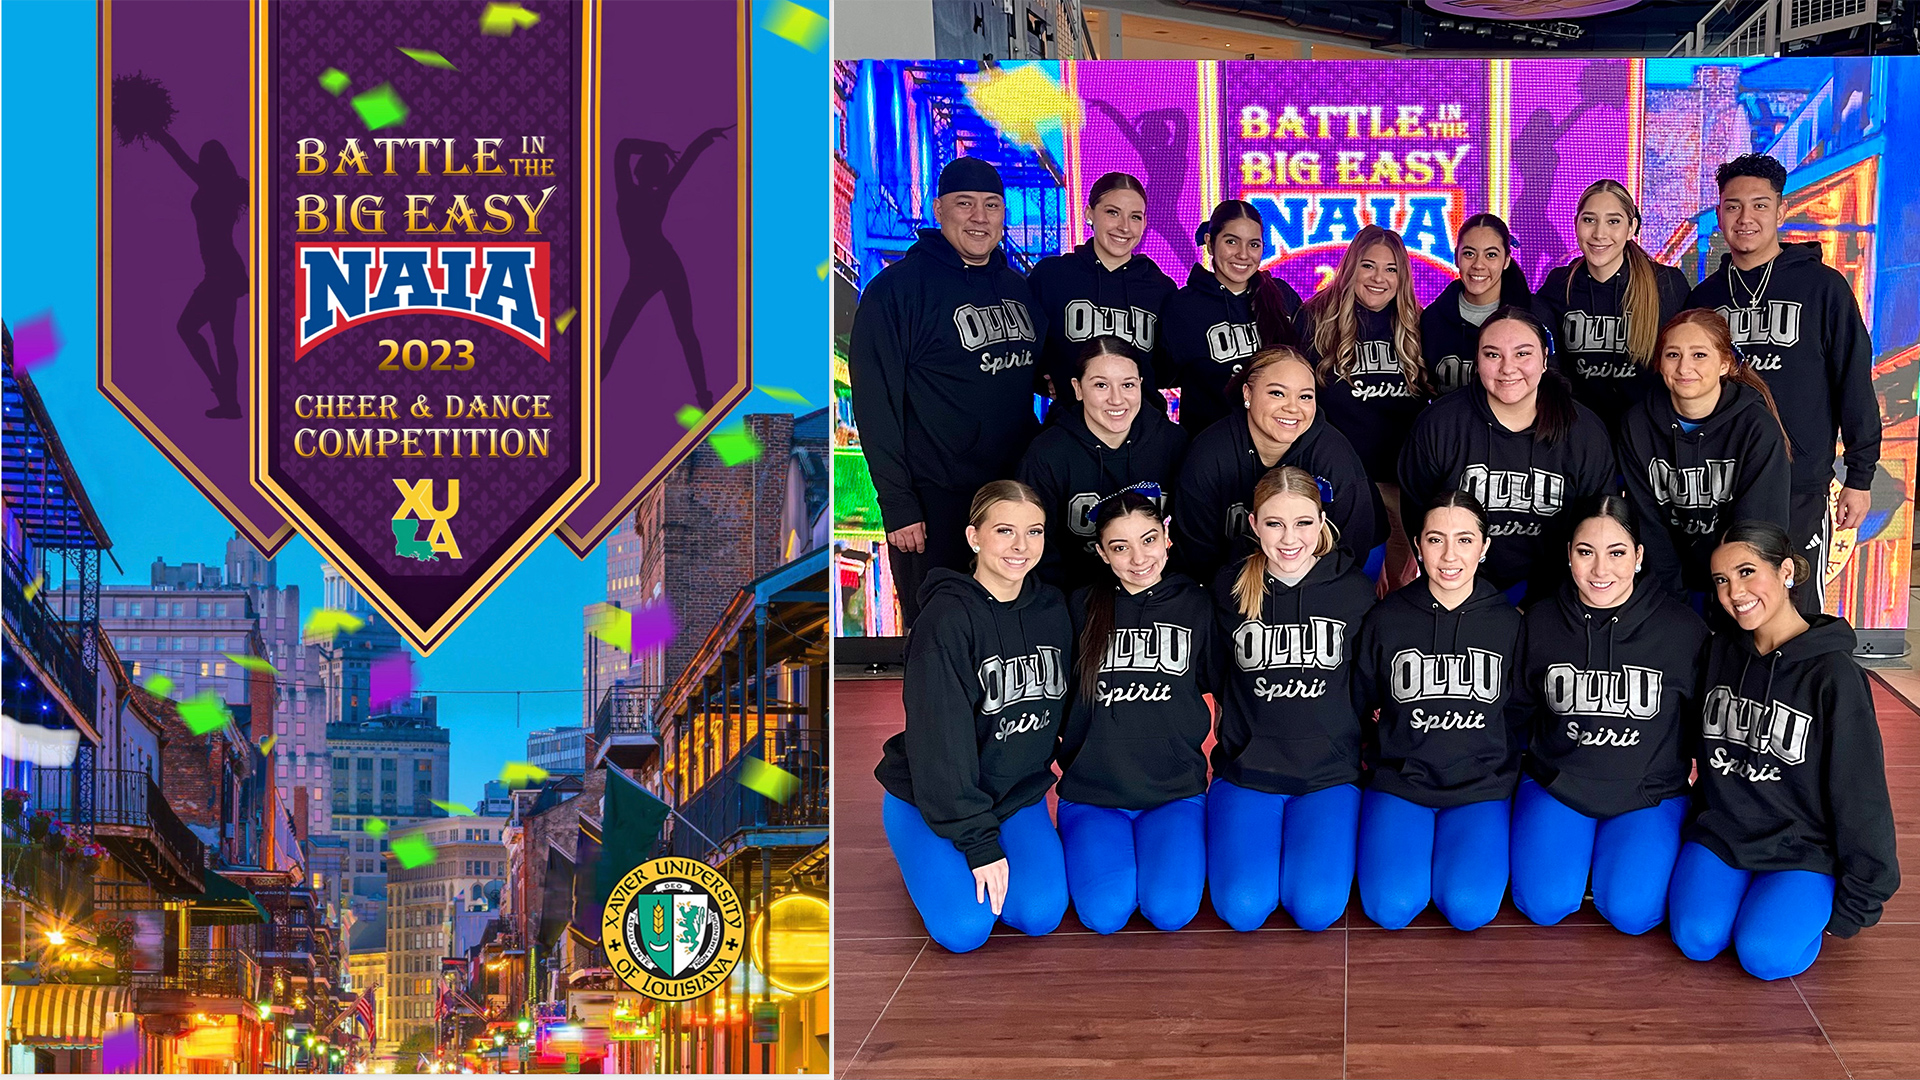 OLLU Spirit Competed at Battle in the Big Easy